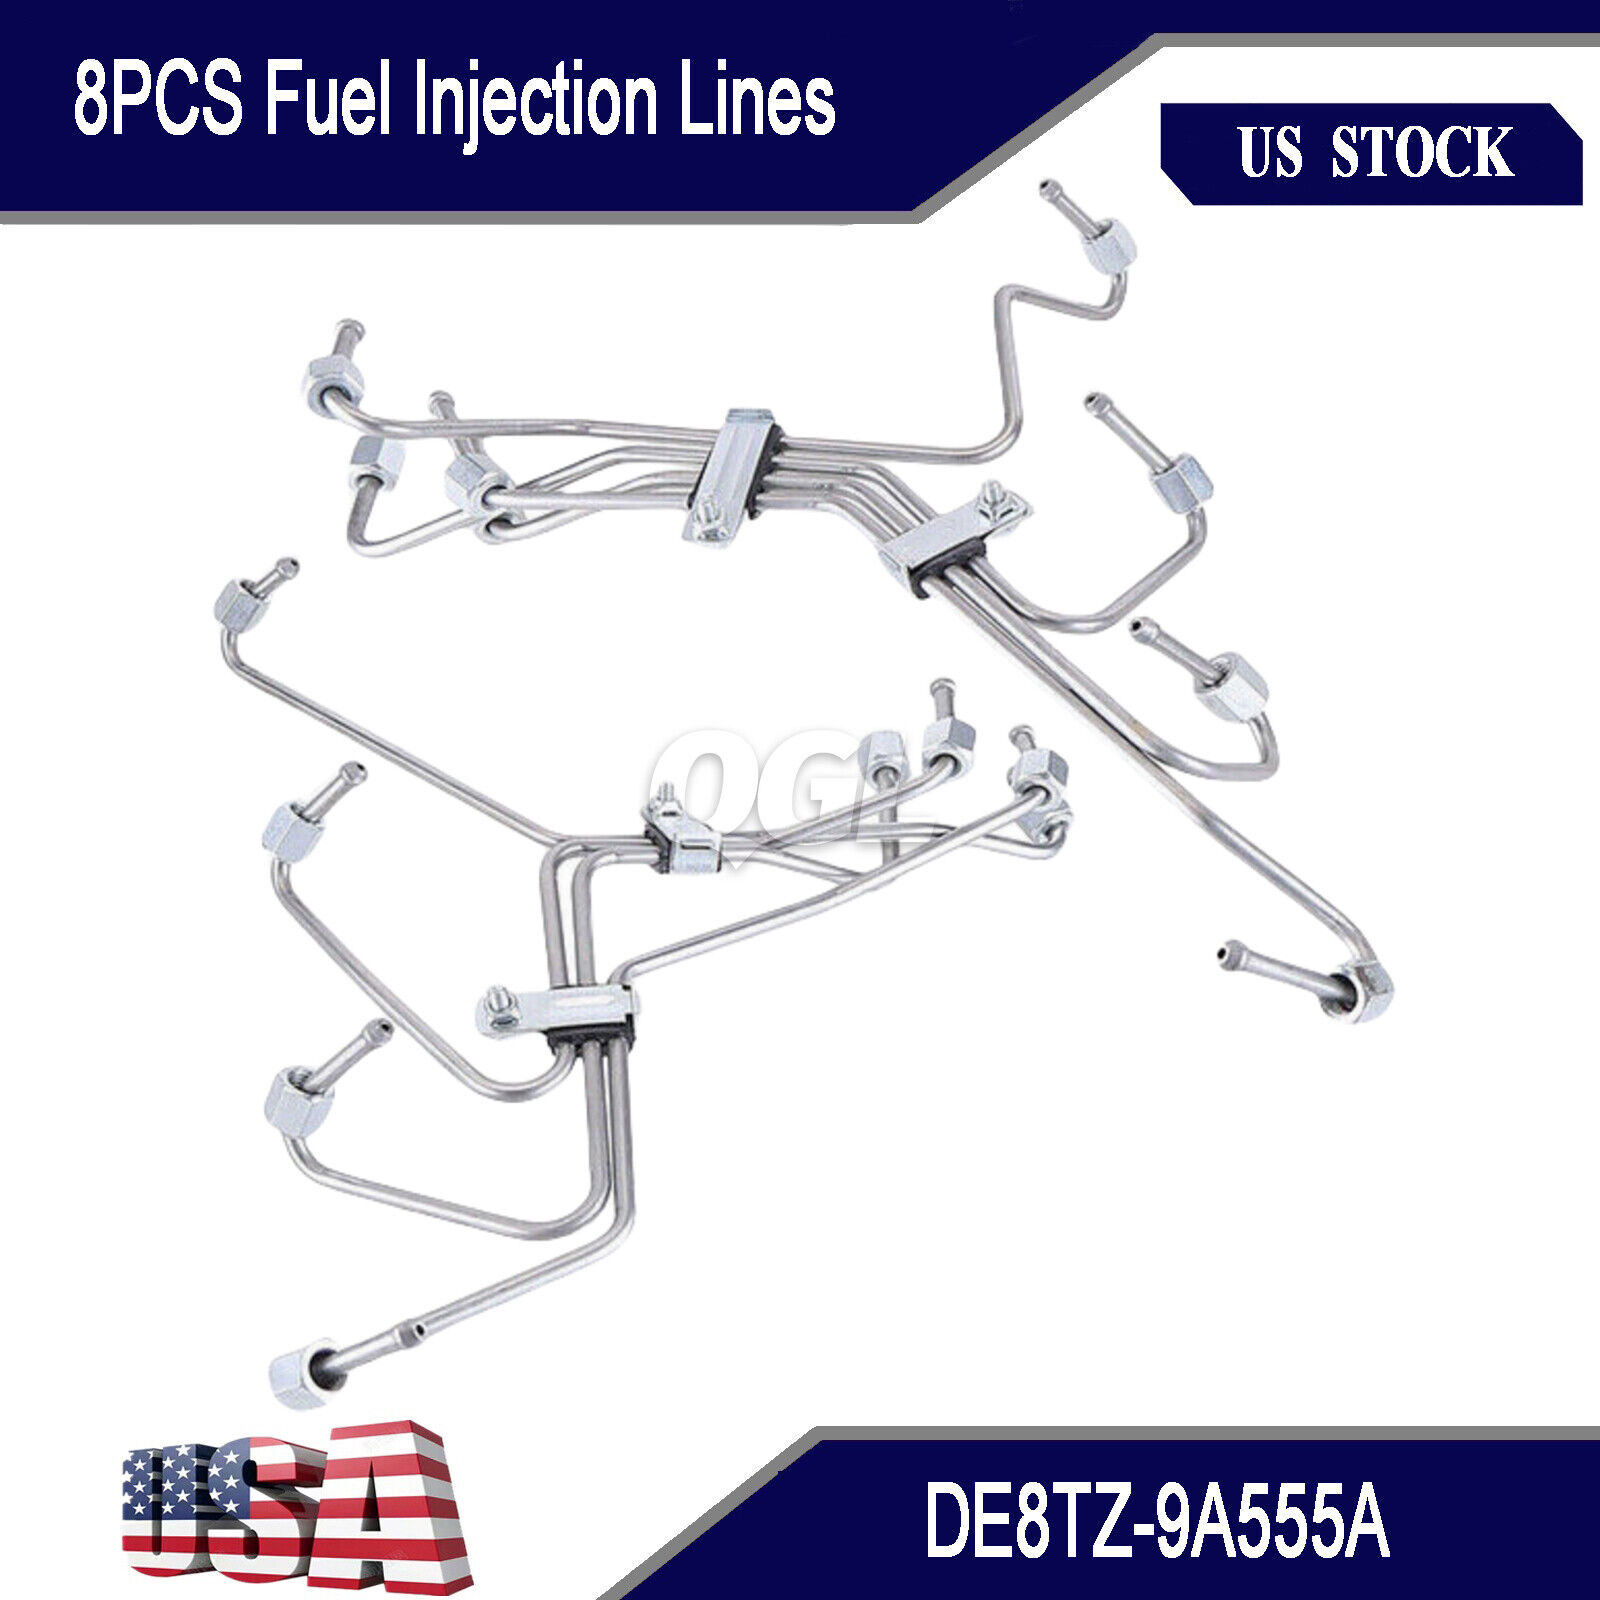 NEW IDI Diesel F-Series Fuel Injection Lines Set For 1983-1994 Ford 6.9L 7.3L